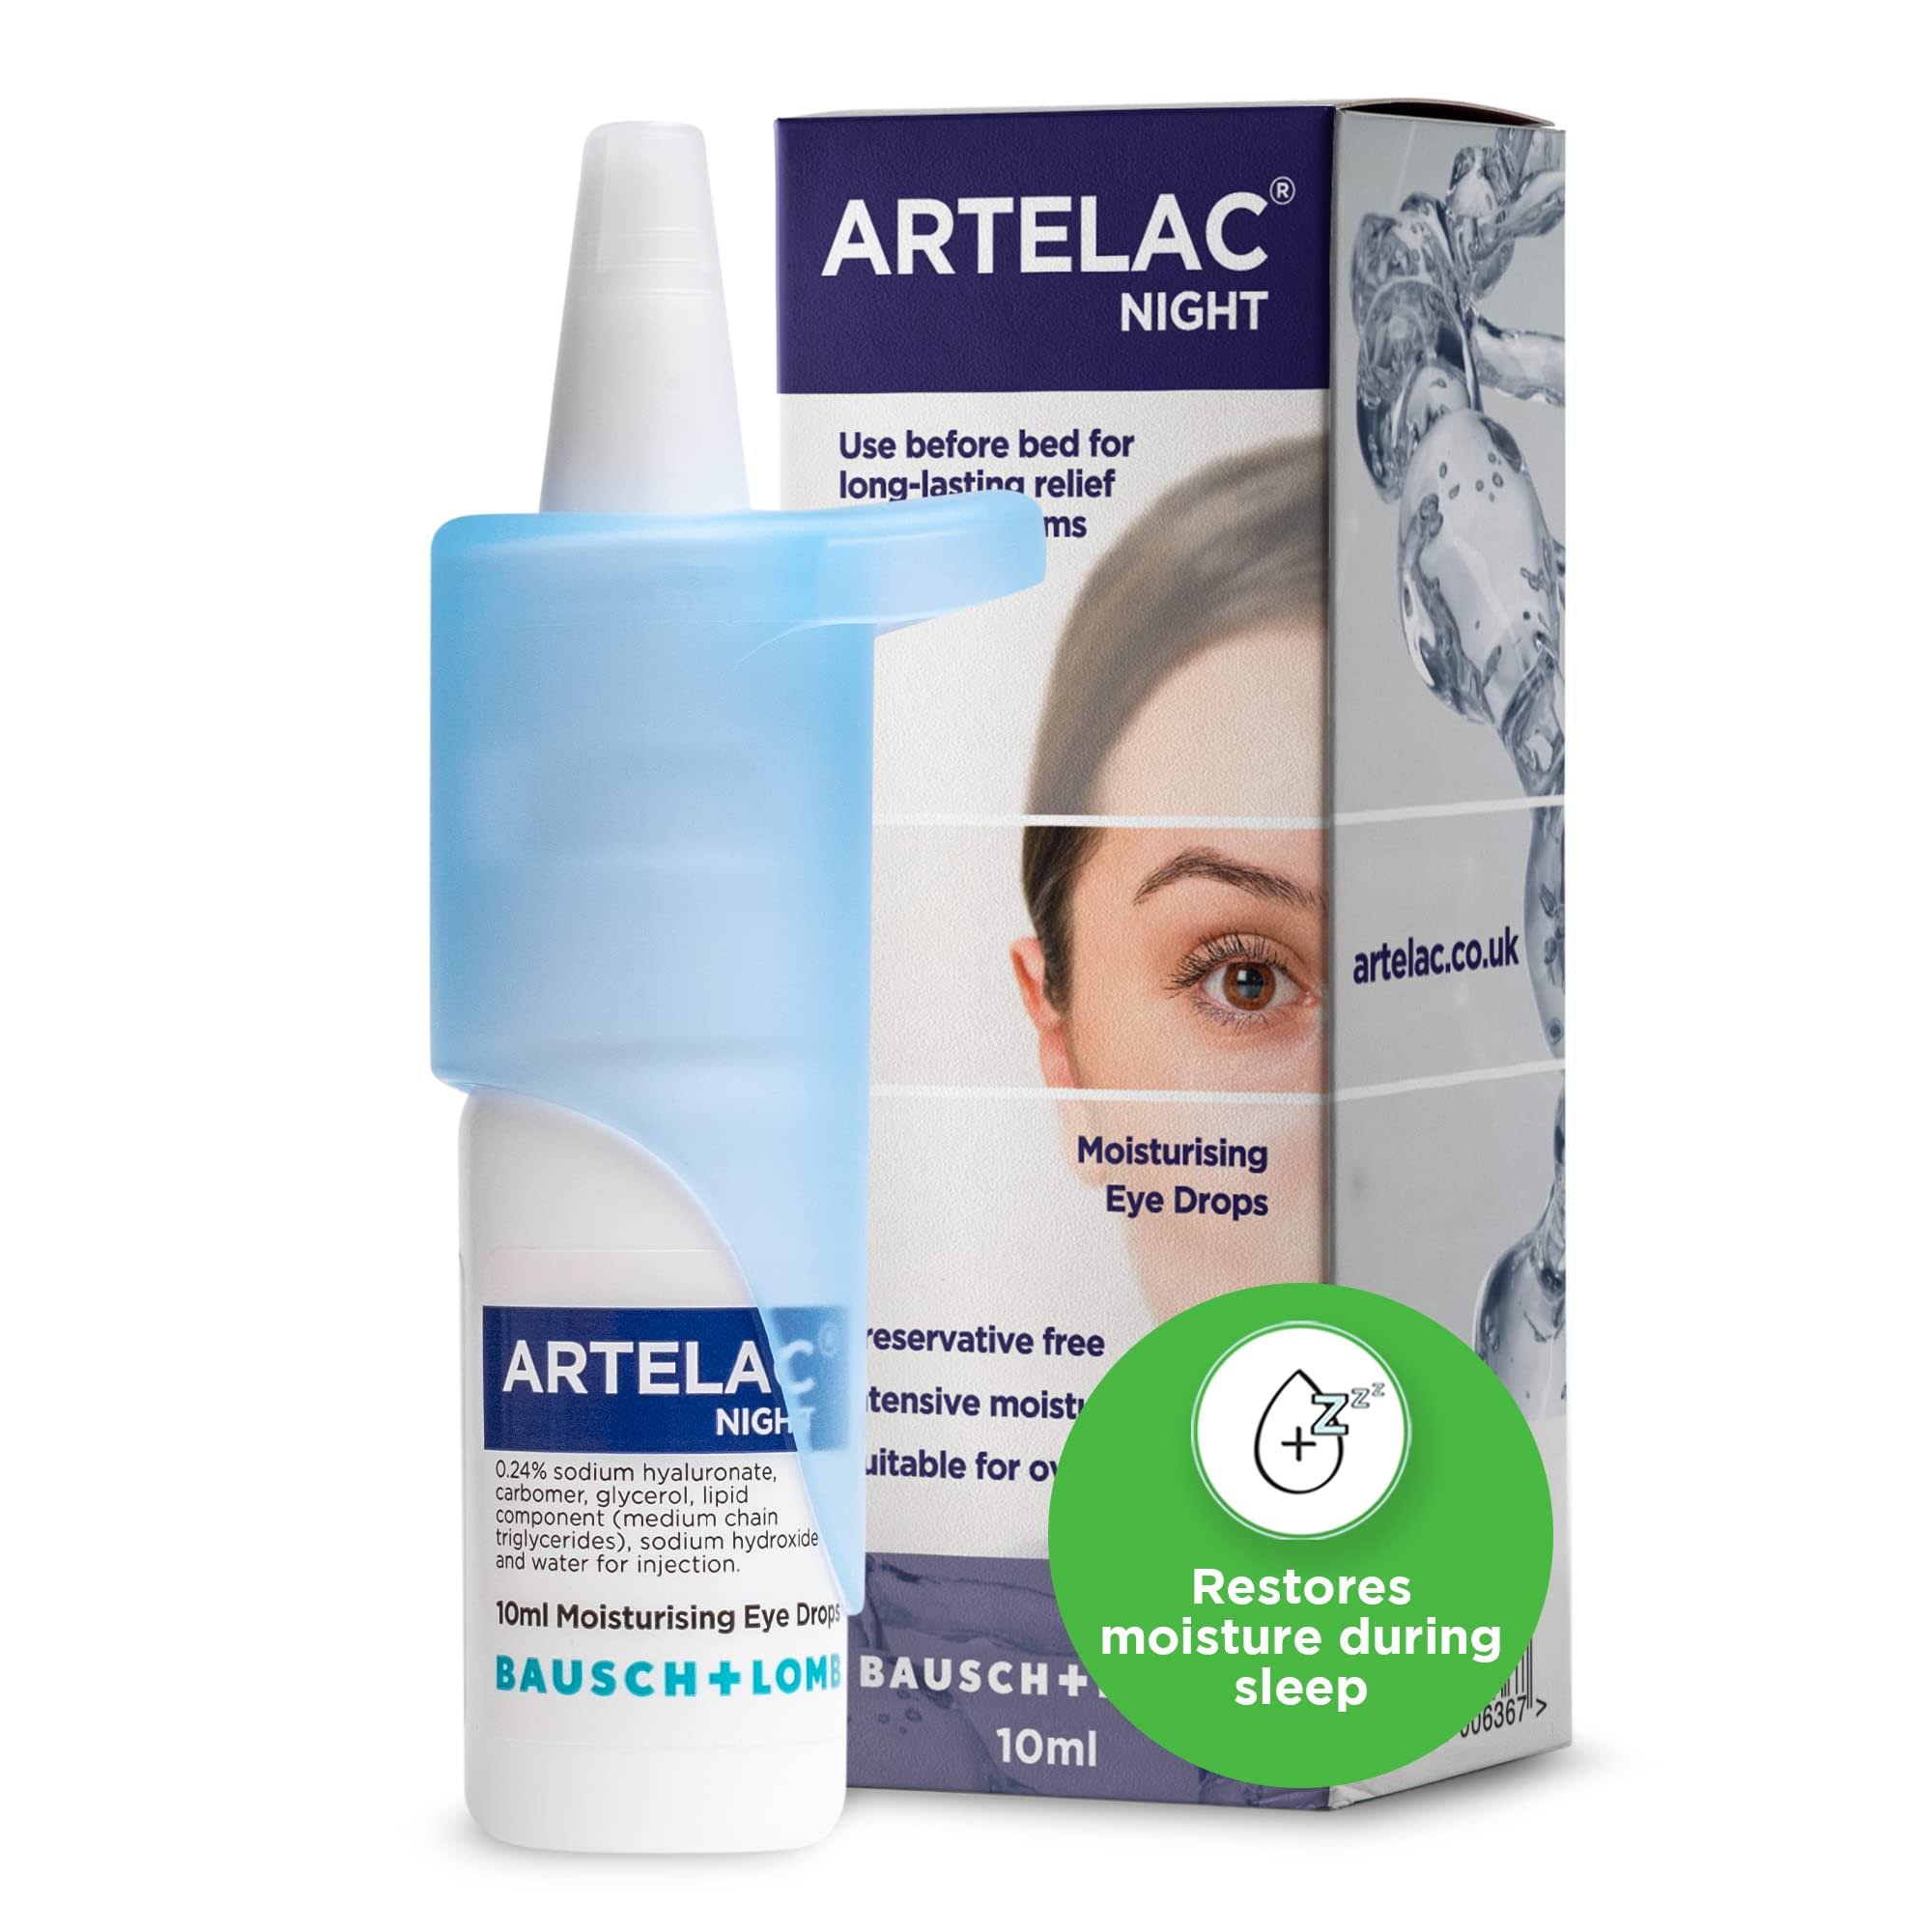 Artelac Night Eye Drops 10ml Provides Immediate Relief and Long-Lasting Moisturisation